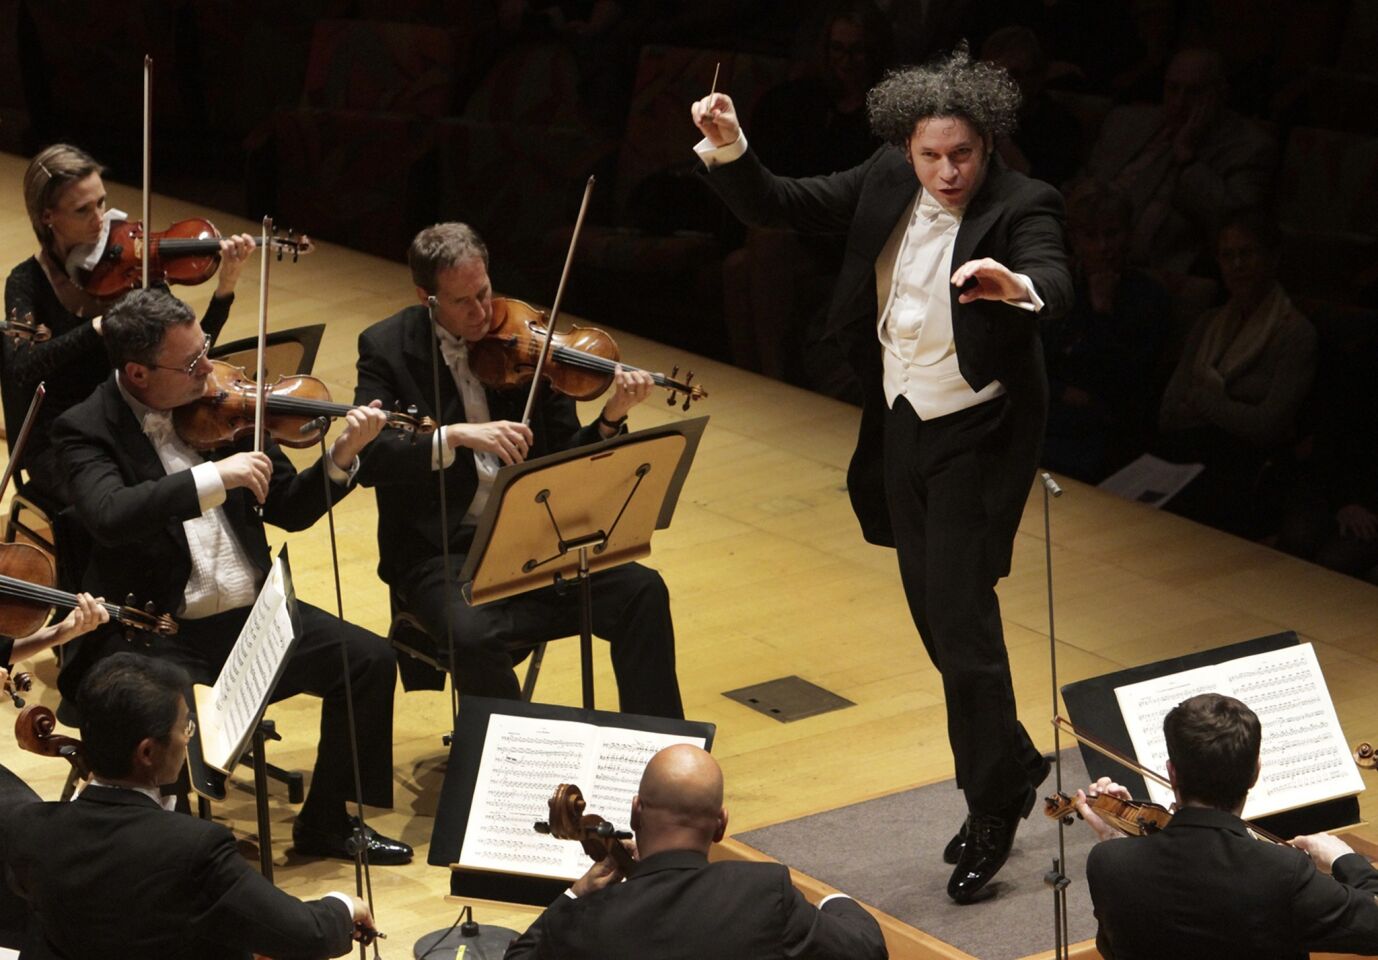 Gustavo Dudamel leads the L.A. Phil and the Los Angeles Children's Chorus in a performance of the complete "Nutckracker" by Tchaikovsky at Walt Disney Concert Hall. REVIEW: L.A. Phil, Dudamel reinvigorate Tchaikovsky's 'Nutcracker'